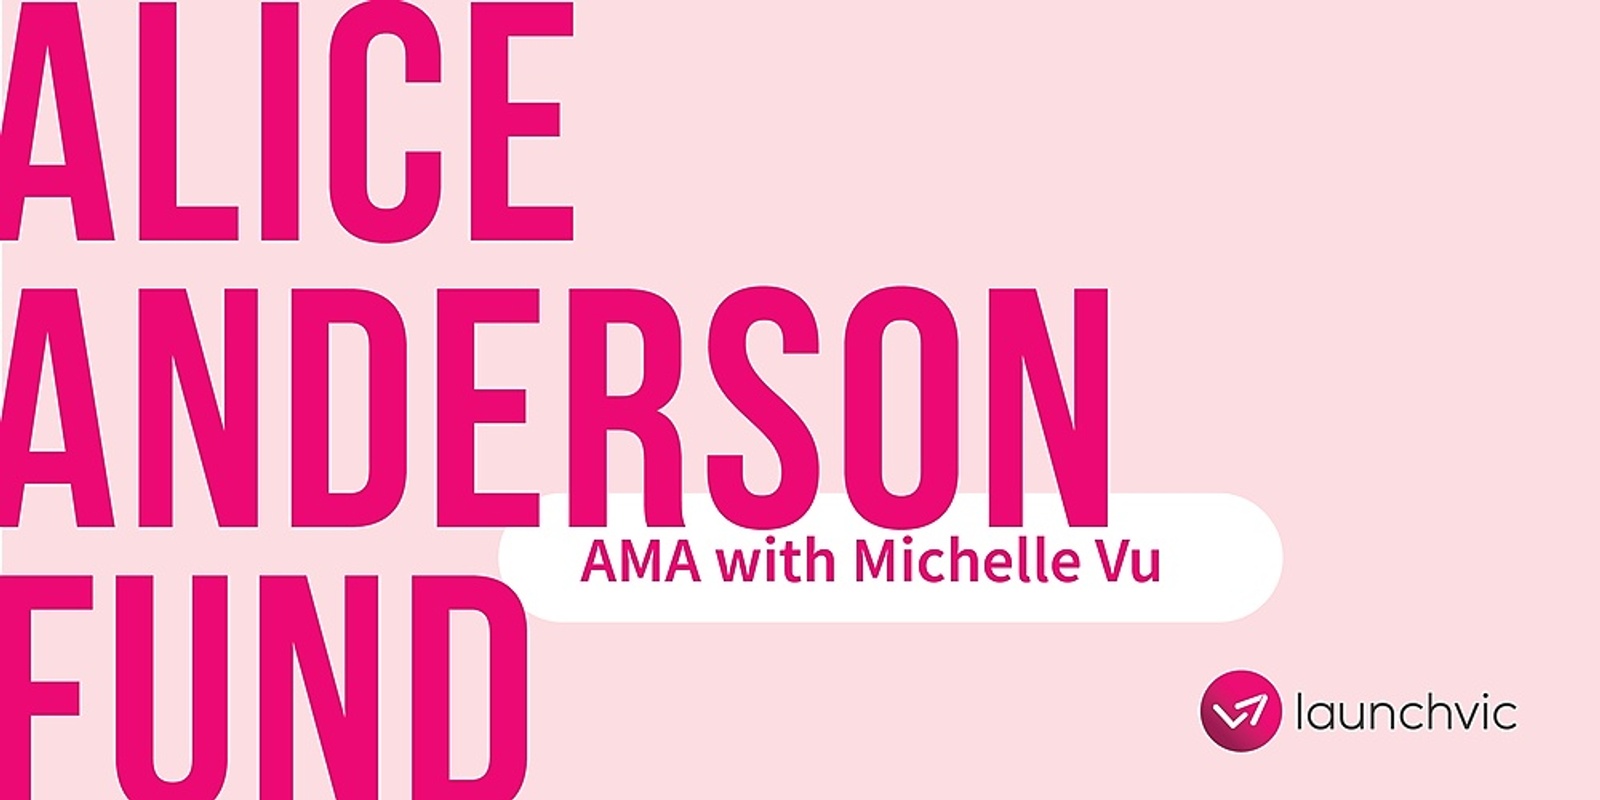 Banner image for AMA with The Alice Anderson Fund